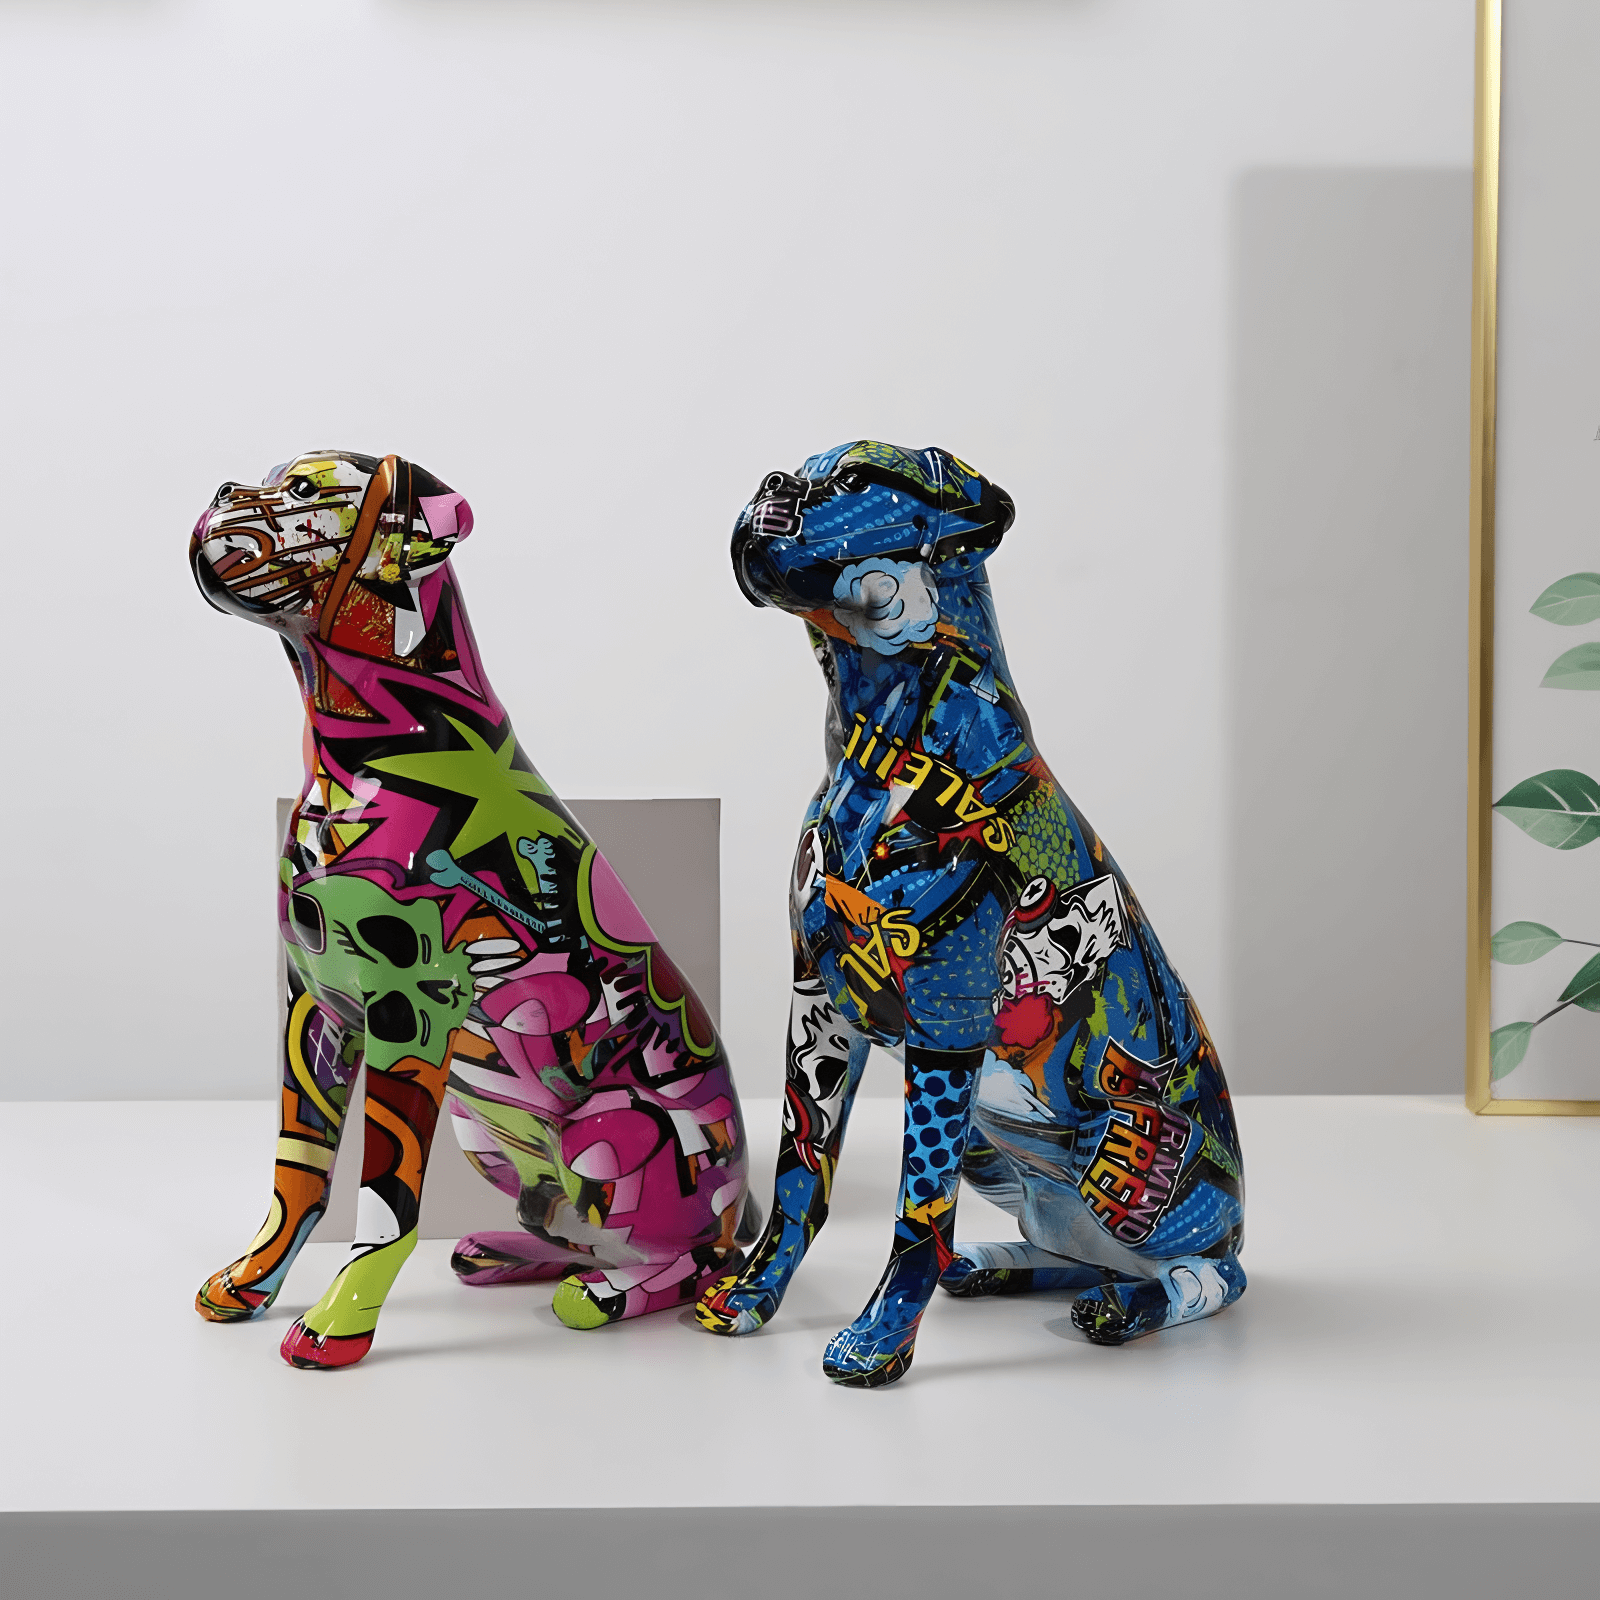 Boxer dog statues